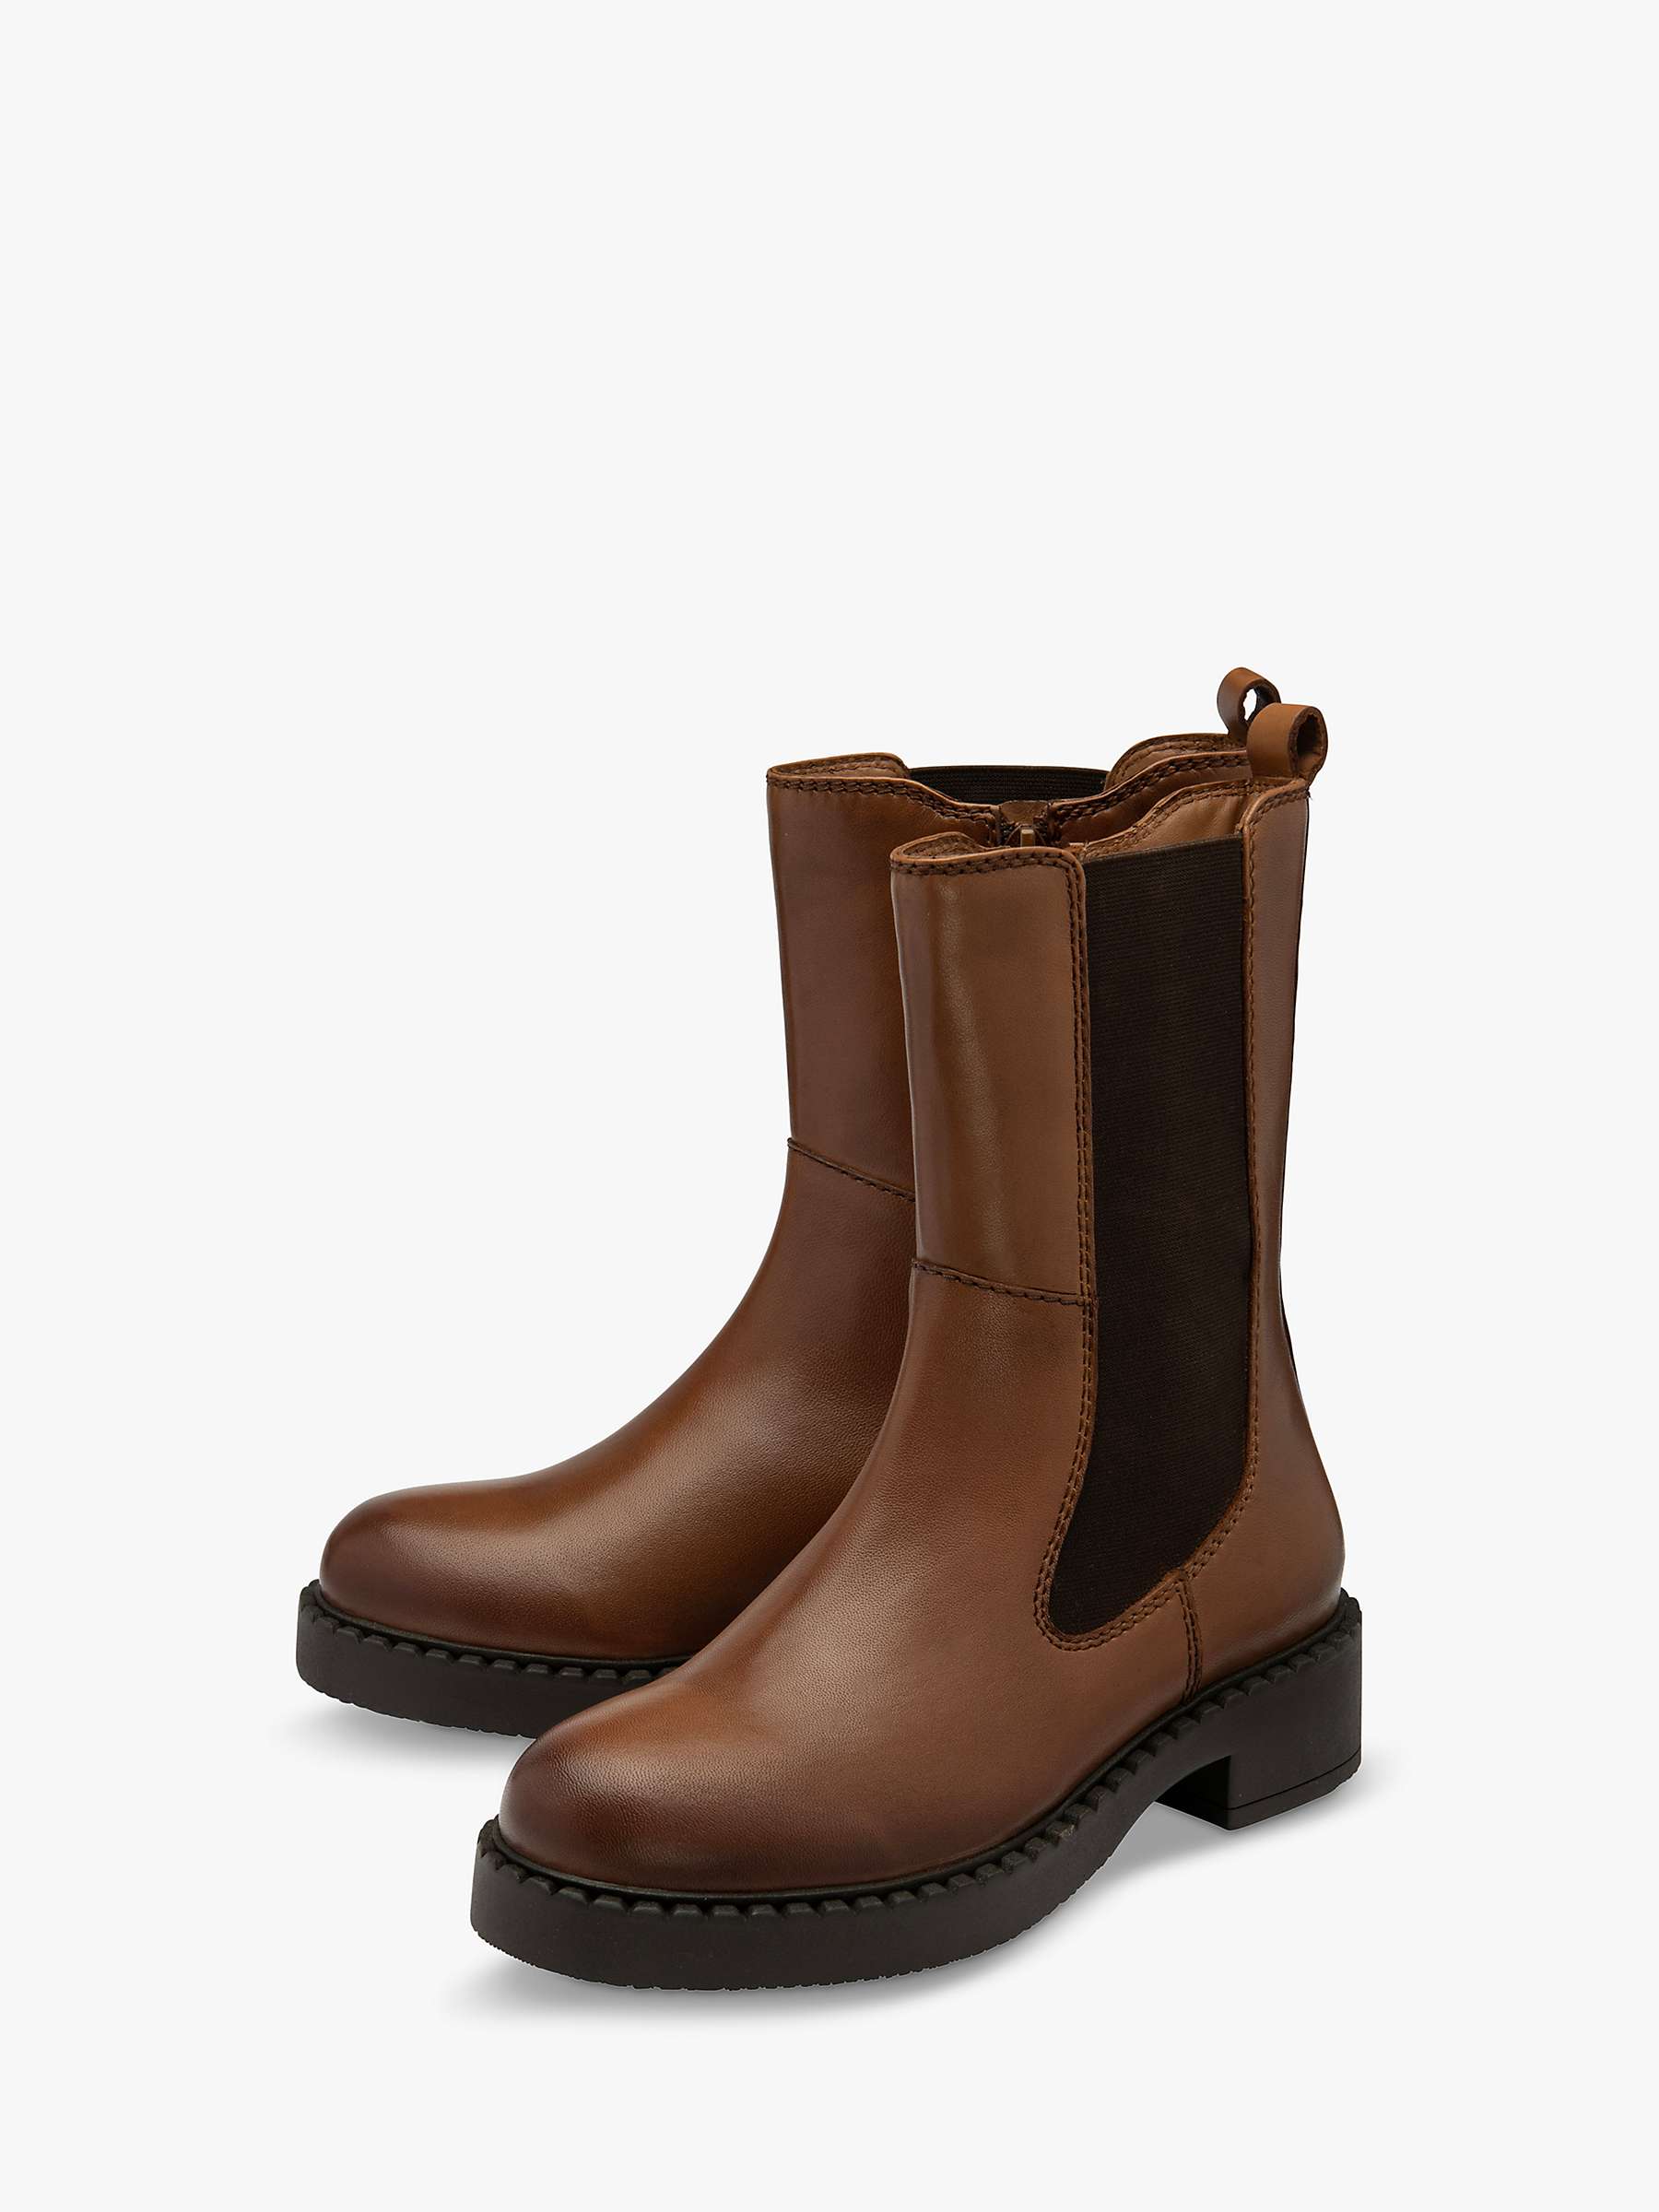 Buy Ravel Garvie Leather Mid-Calf Boots Online at johnlewis.com